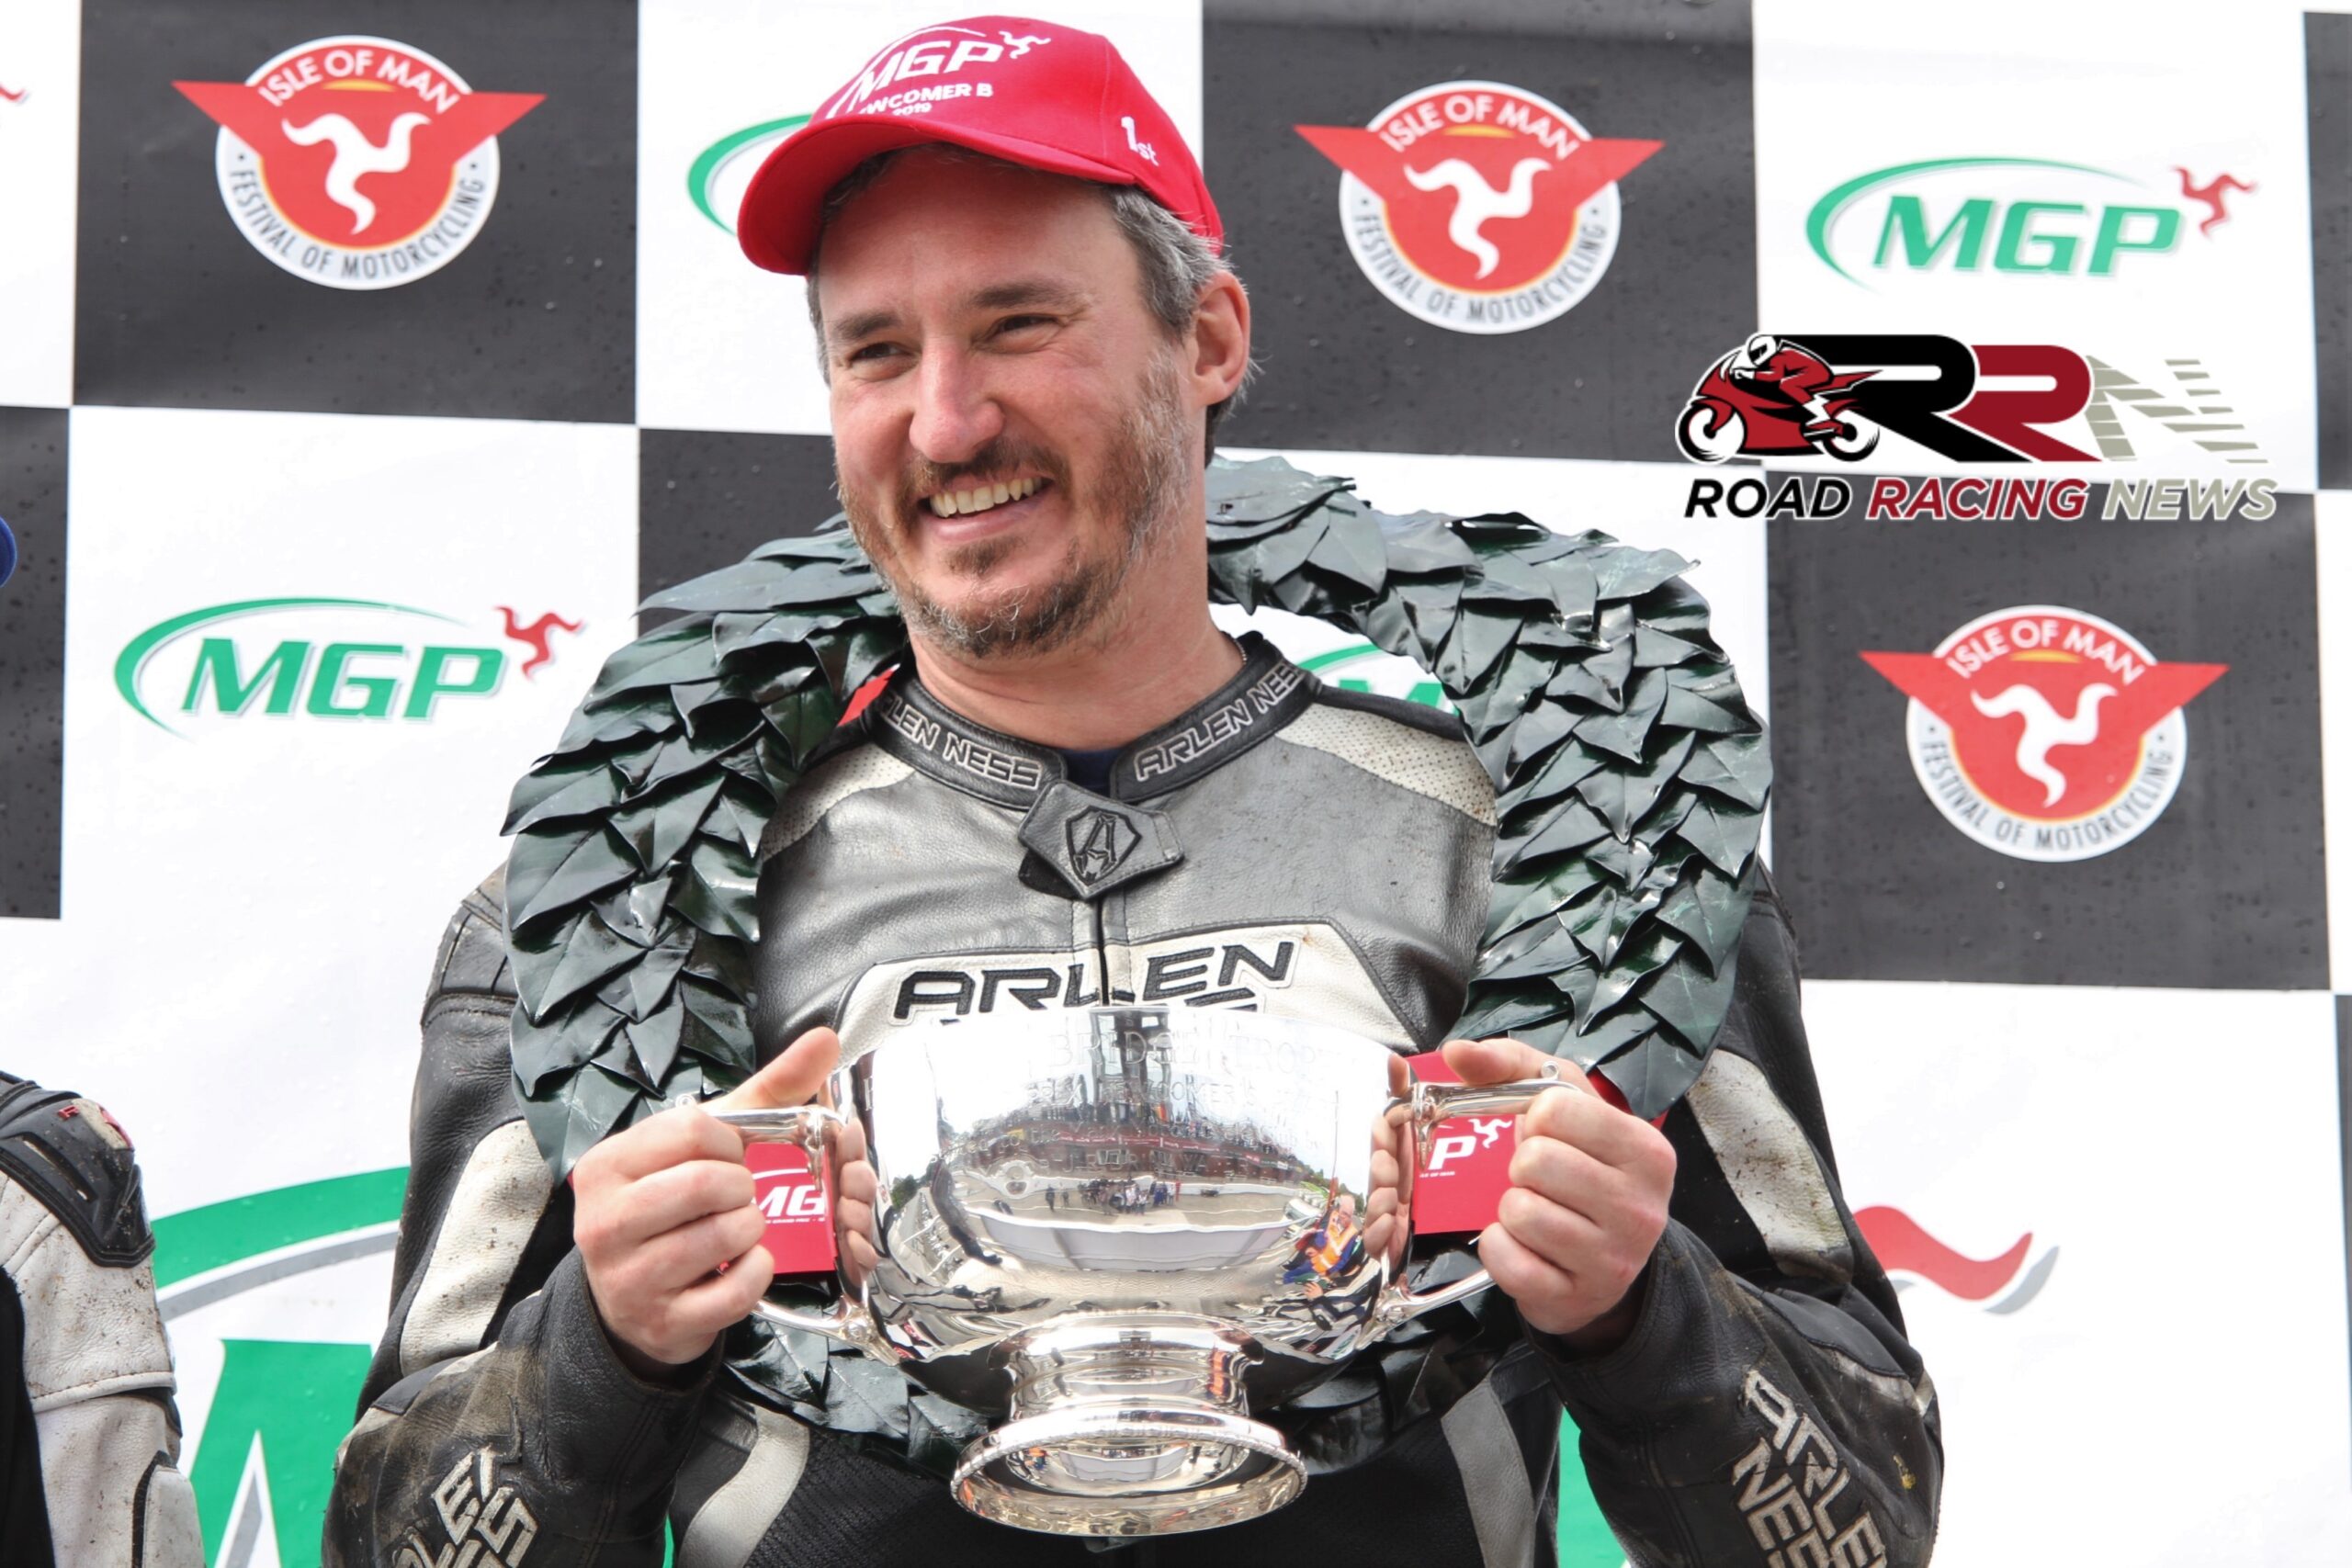 Manx Grand Prix: Kirkby, Falcon Road Racing’s Jackson Secure Newcomers B, C Victories